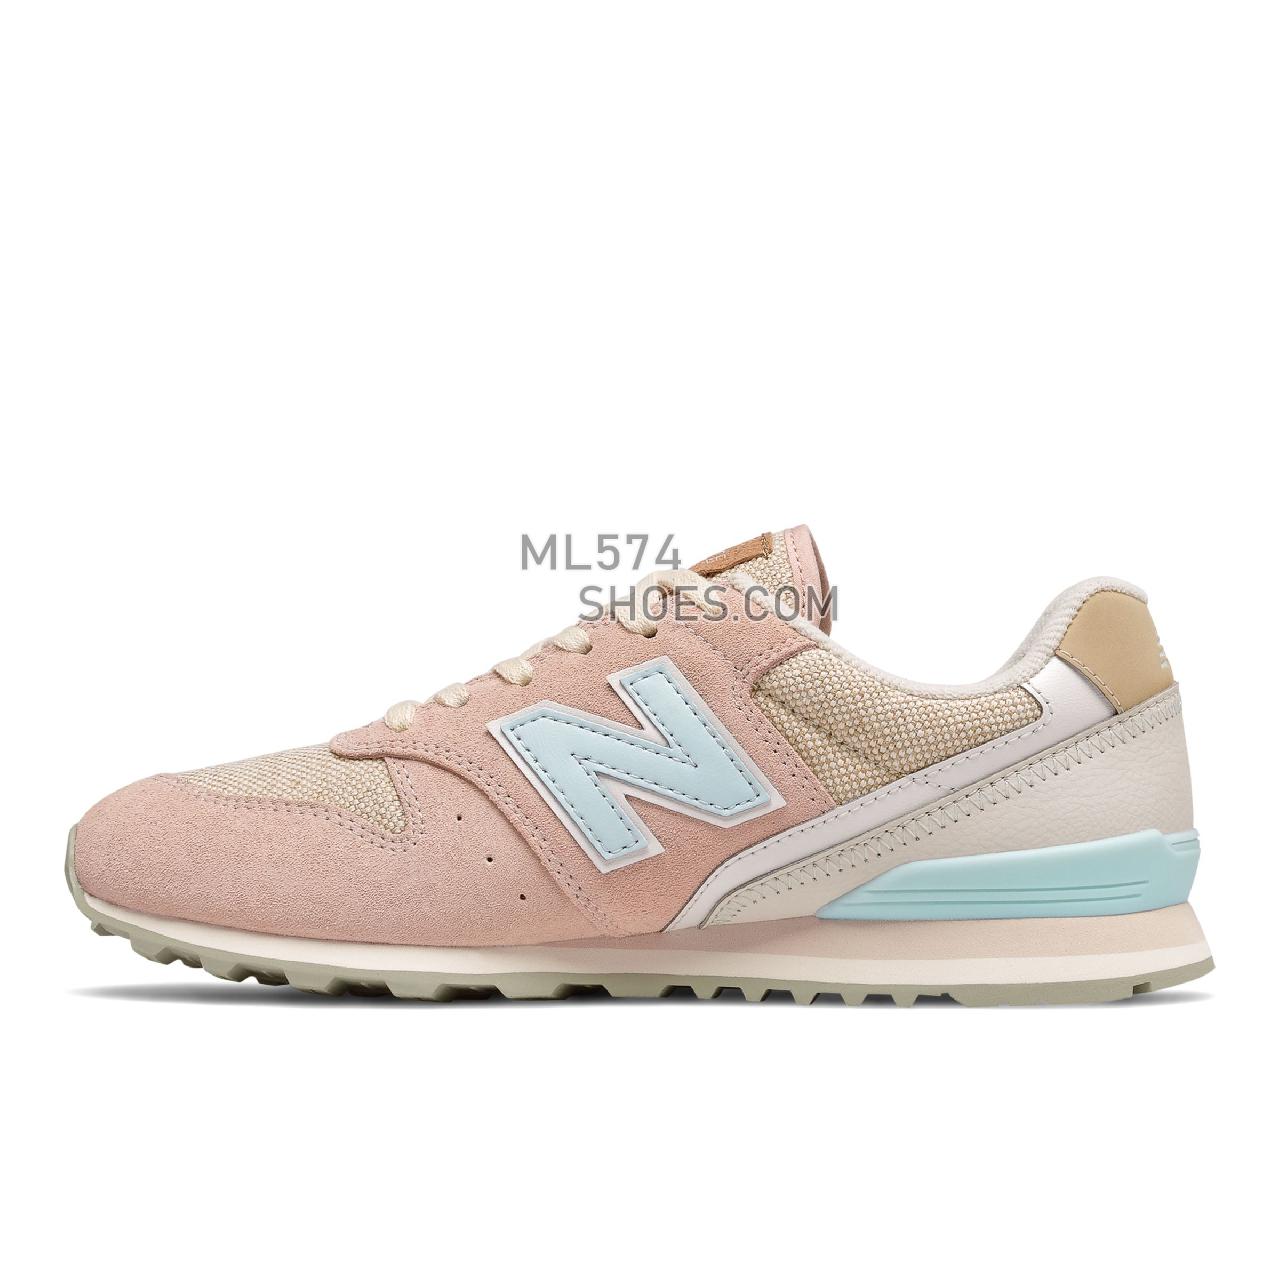 New Balance WL996v2 - Women's Classic Sneakers - Rose Water with White Mint - WL996CPA